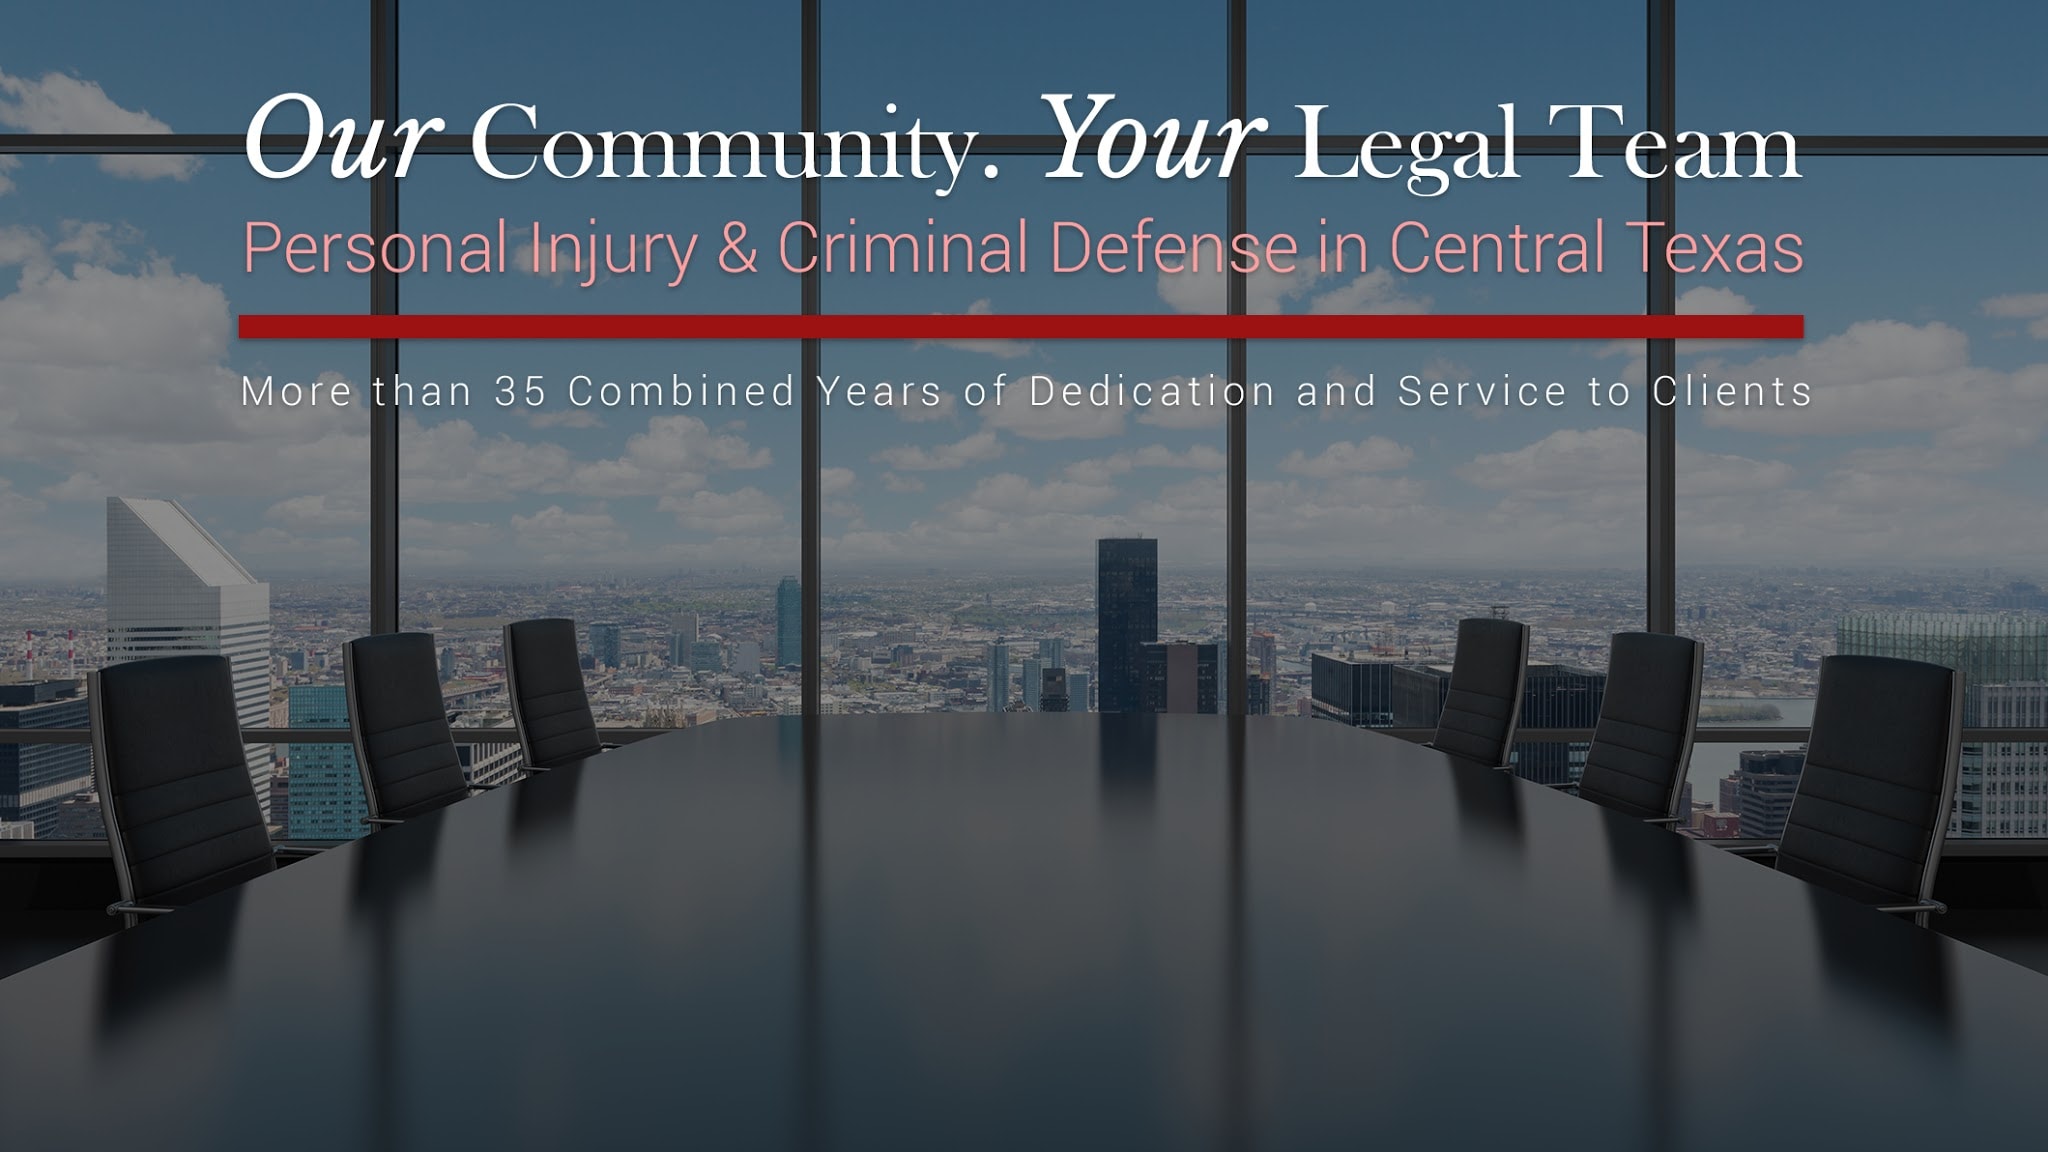 Kyle Law Firm - New Braunfels, TX, US, lawyers personal injury